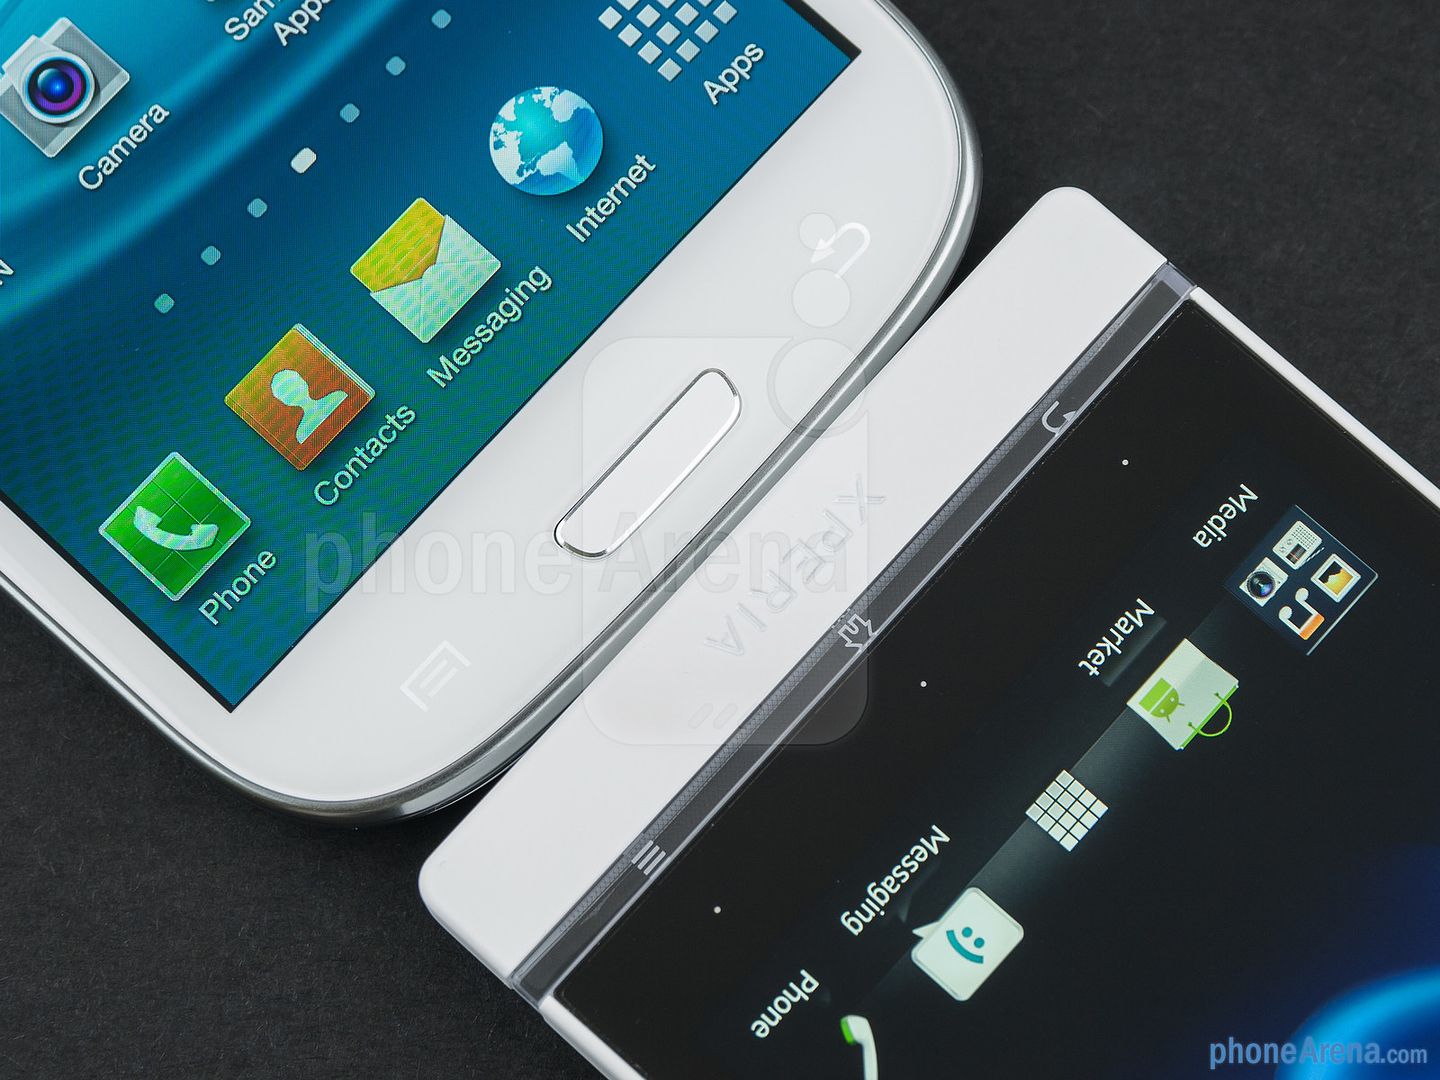 Xperia S sized up against the Samsung Galaxy S III